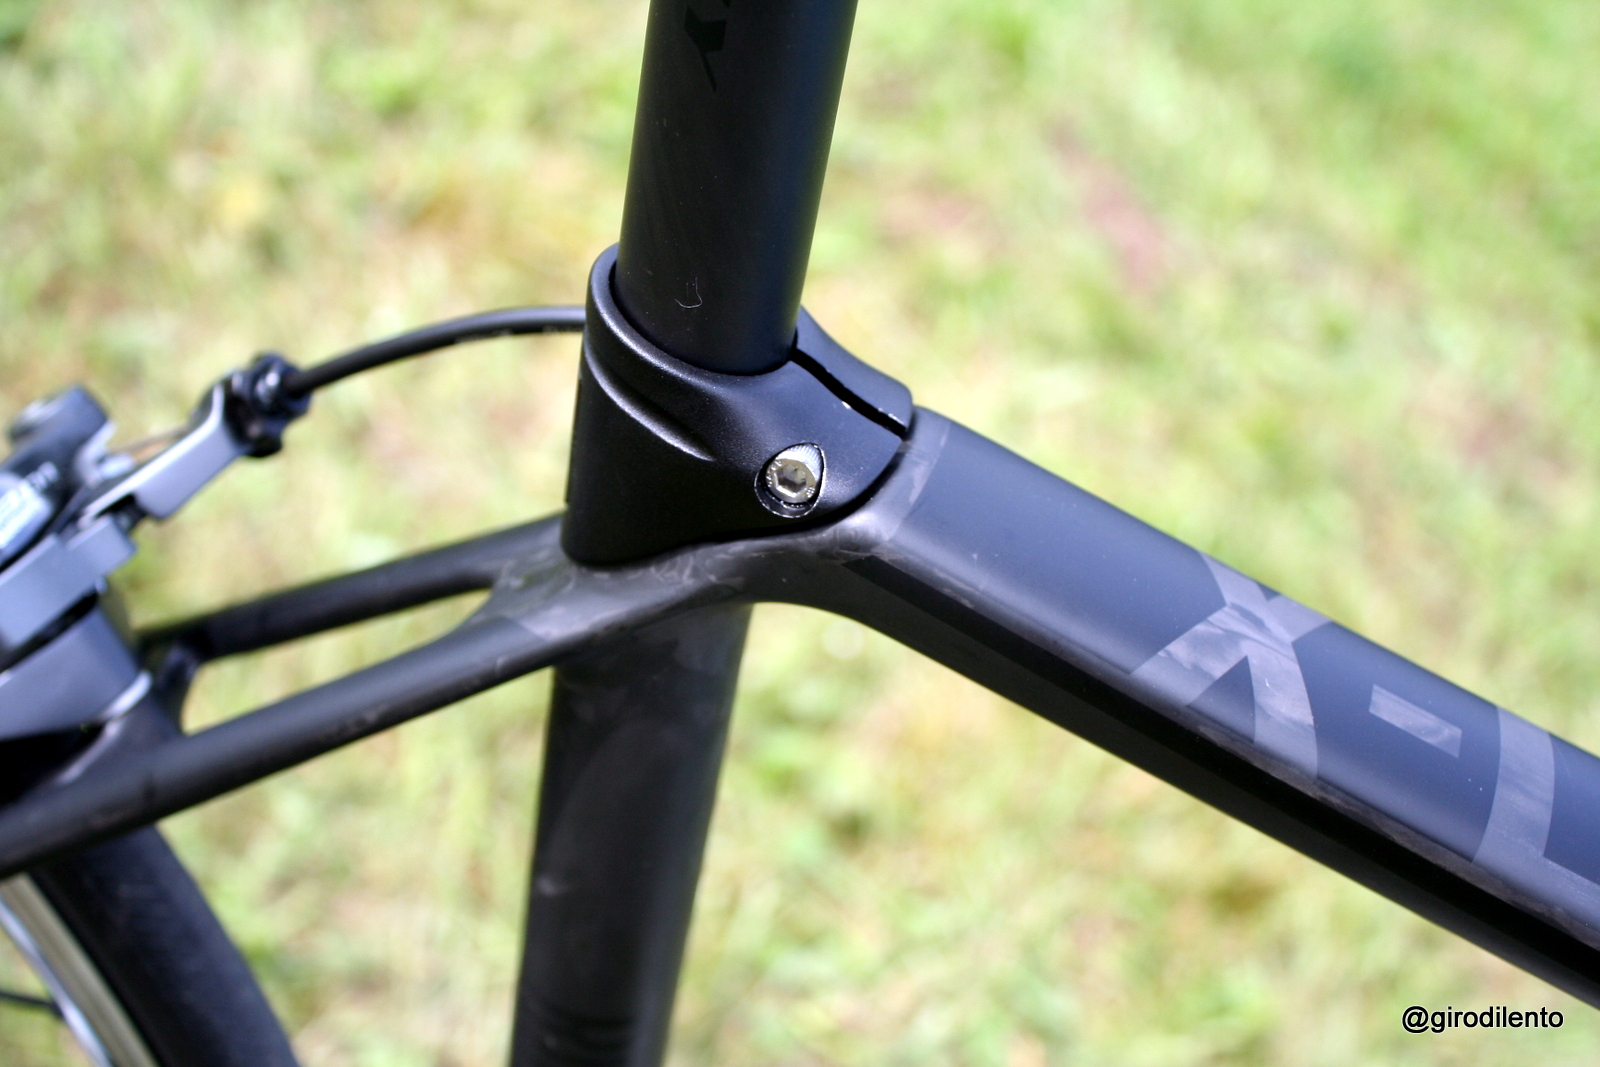 X-Lite Team now also features what's become the family seatpost design for Rose